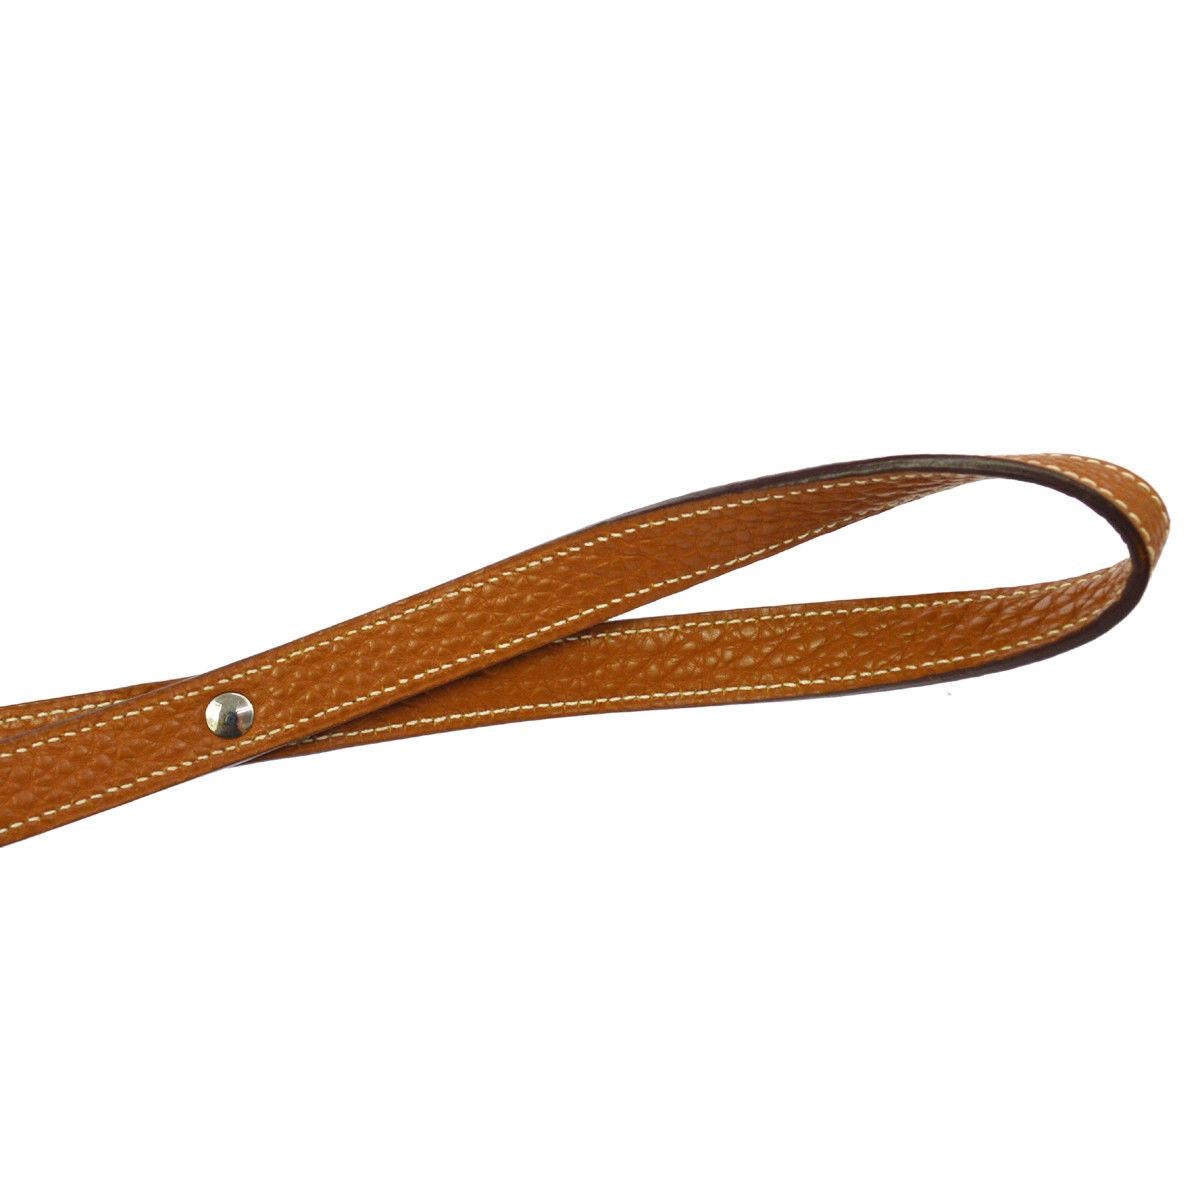 Hermes Cognac Brown Leather Silver Kelly Lock Dog Pet Animal Leash in Box

Leather
Palladium tone hardware 
Hook closure
Date code present
Made in France
Width 0.50